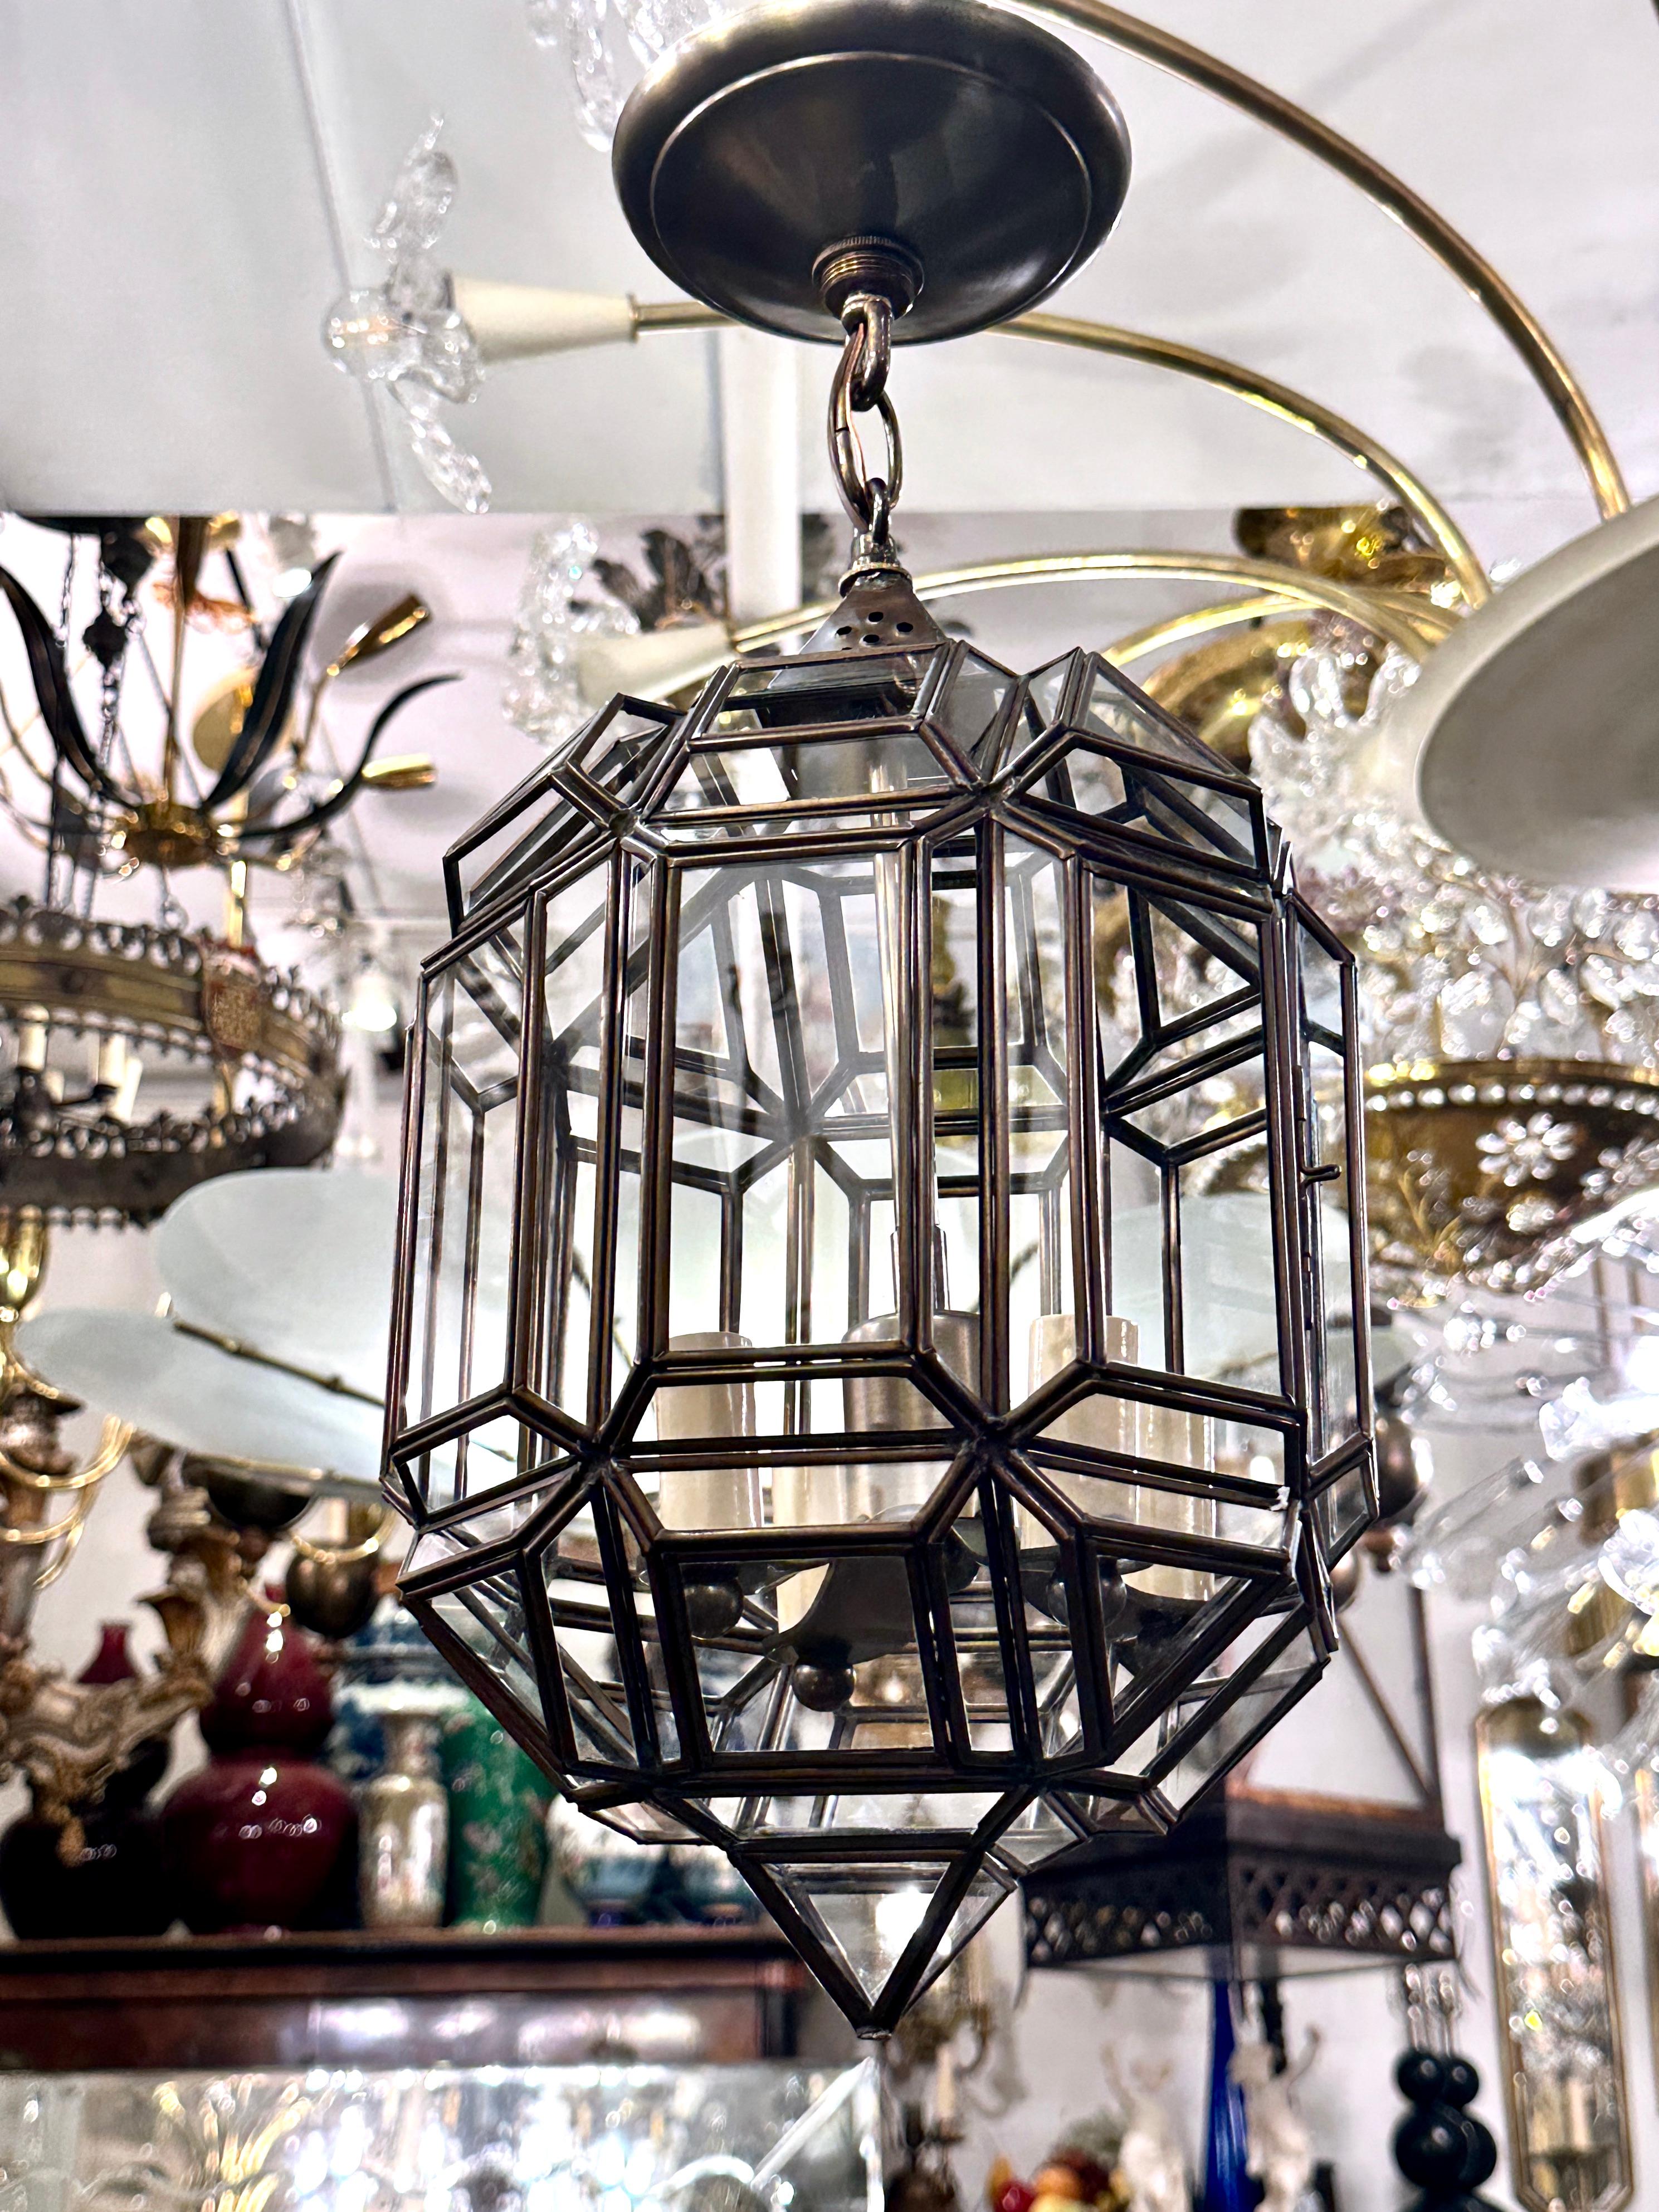 A circa 1960's Italian lantern with faceted body and 4 interior lights.

Measurements:
Drop: 19